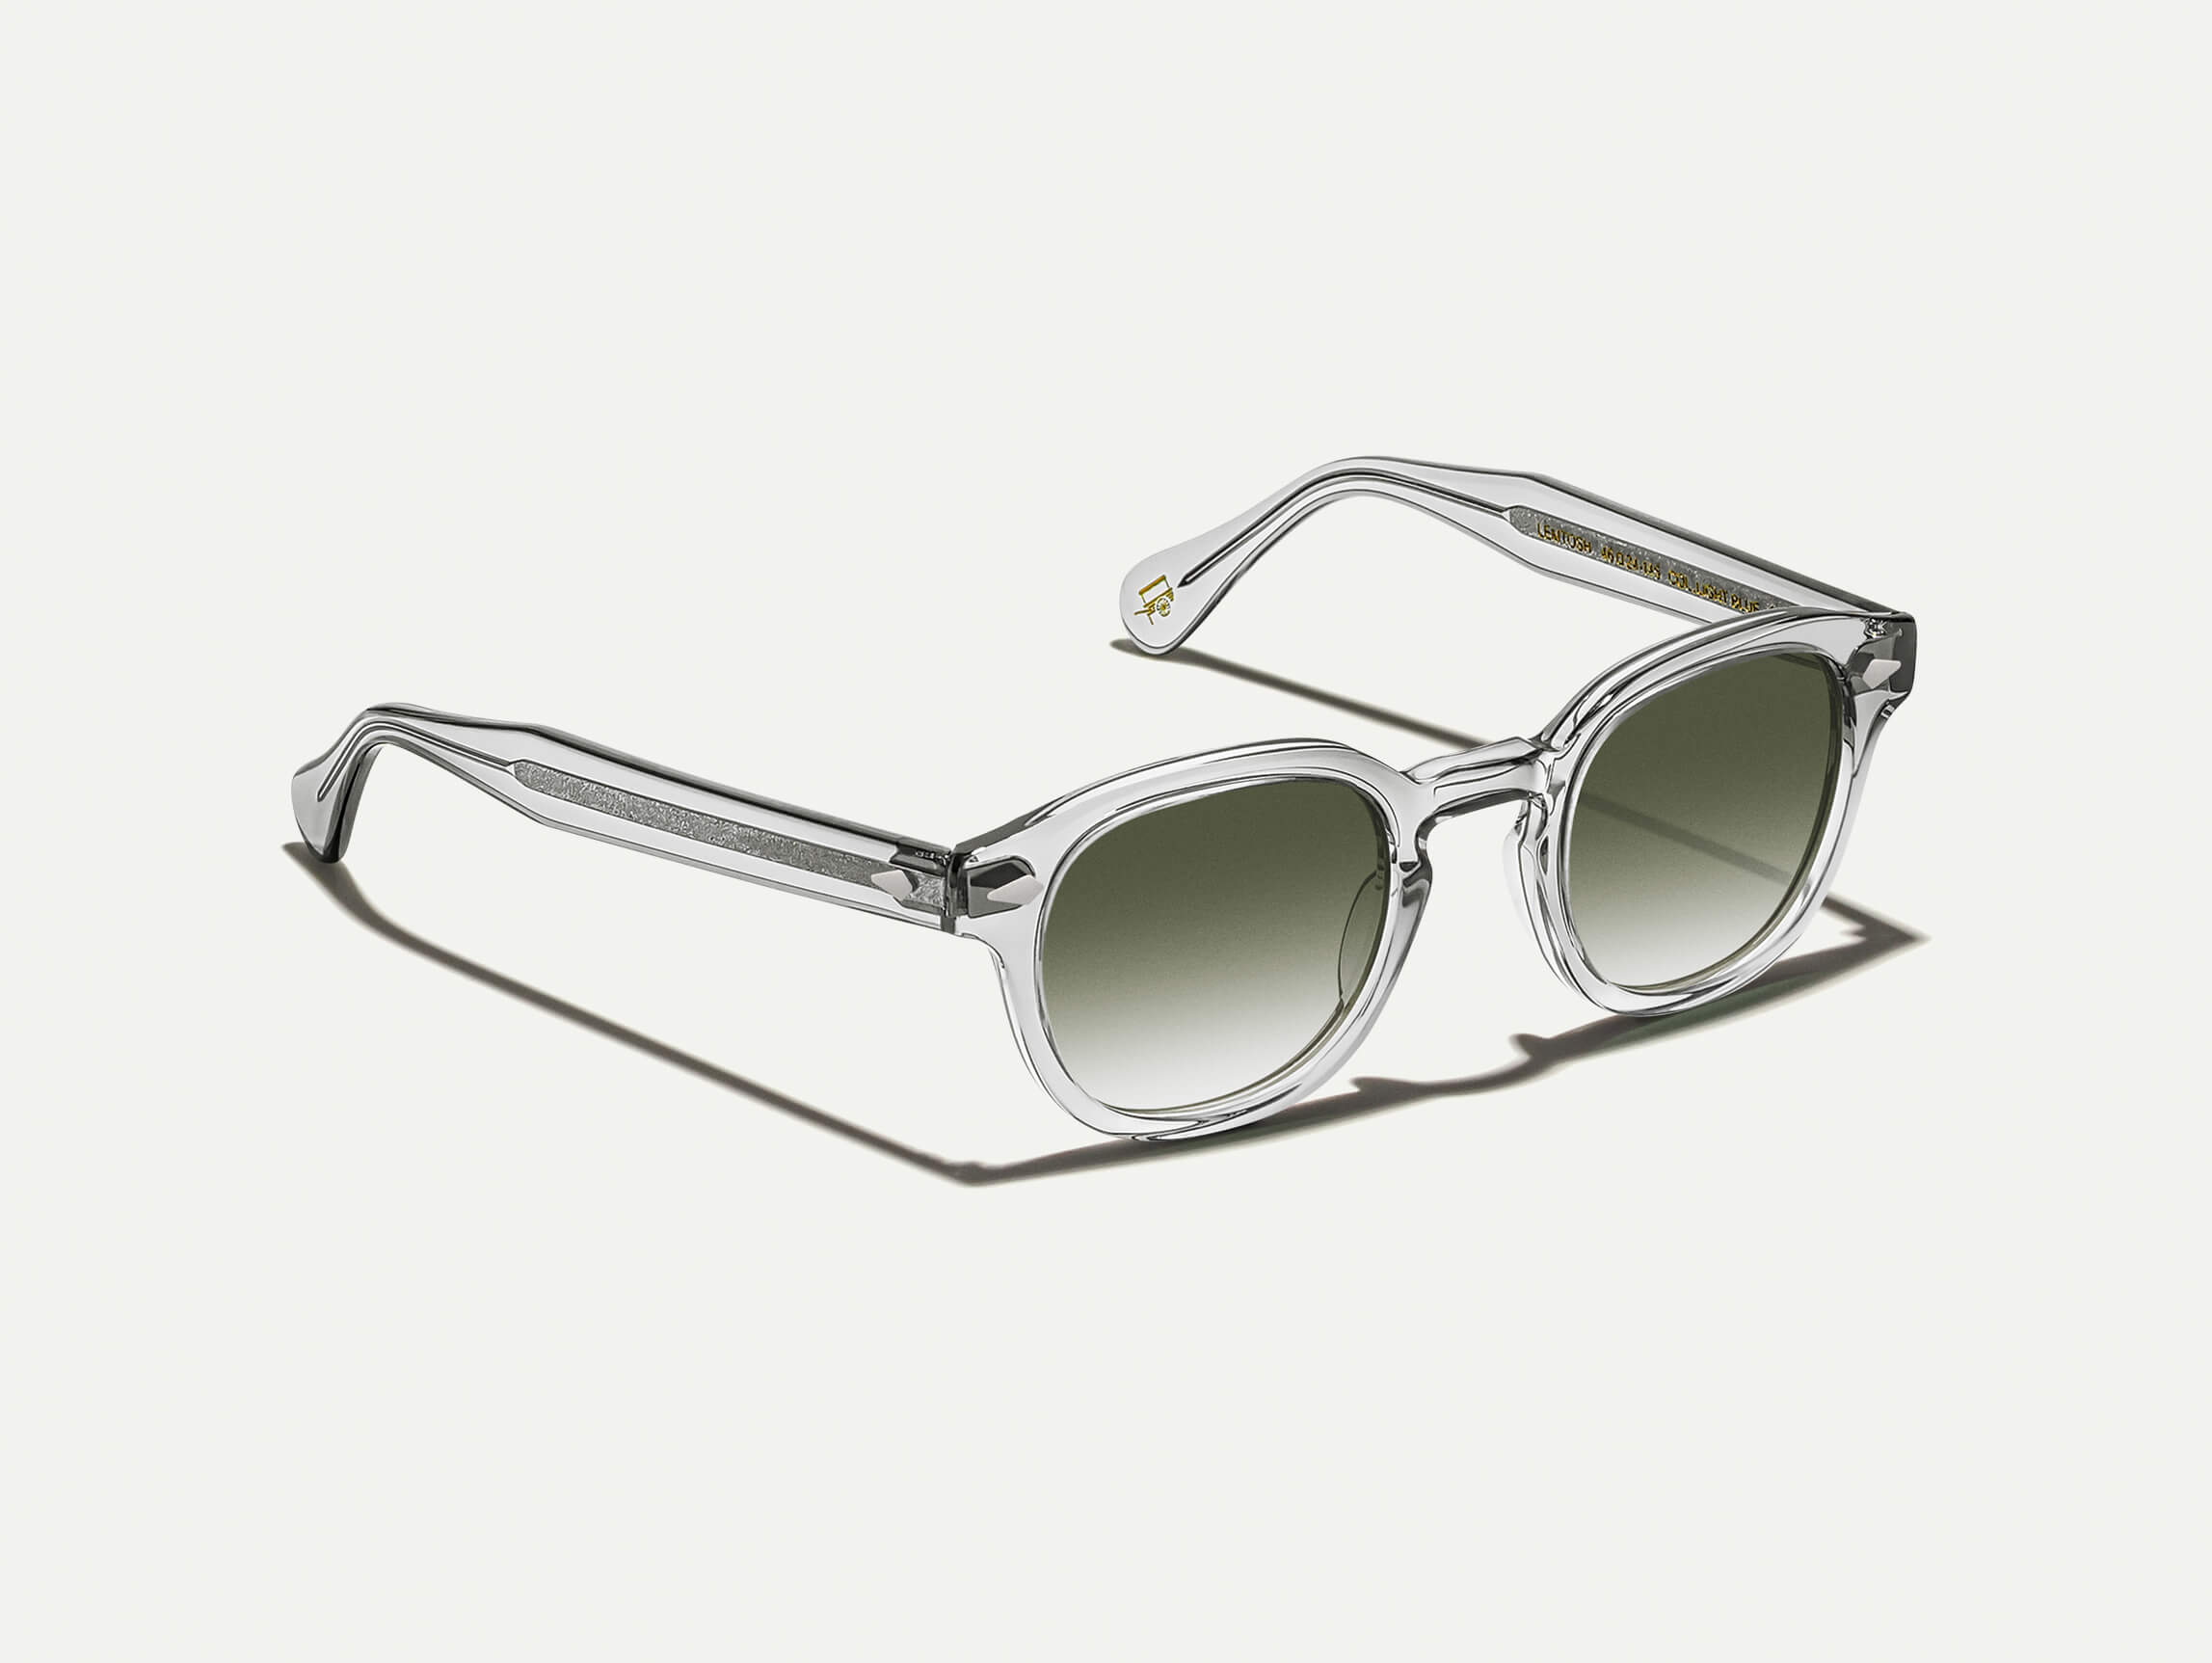 The LEMTOSH Light Grey with G-15 Fade Tinted Lenses